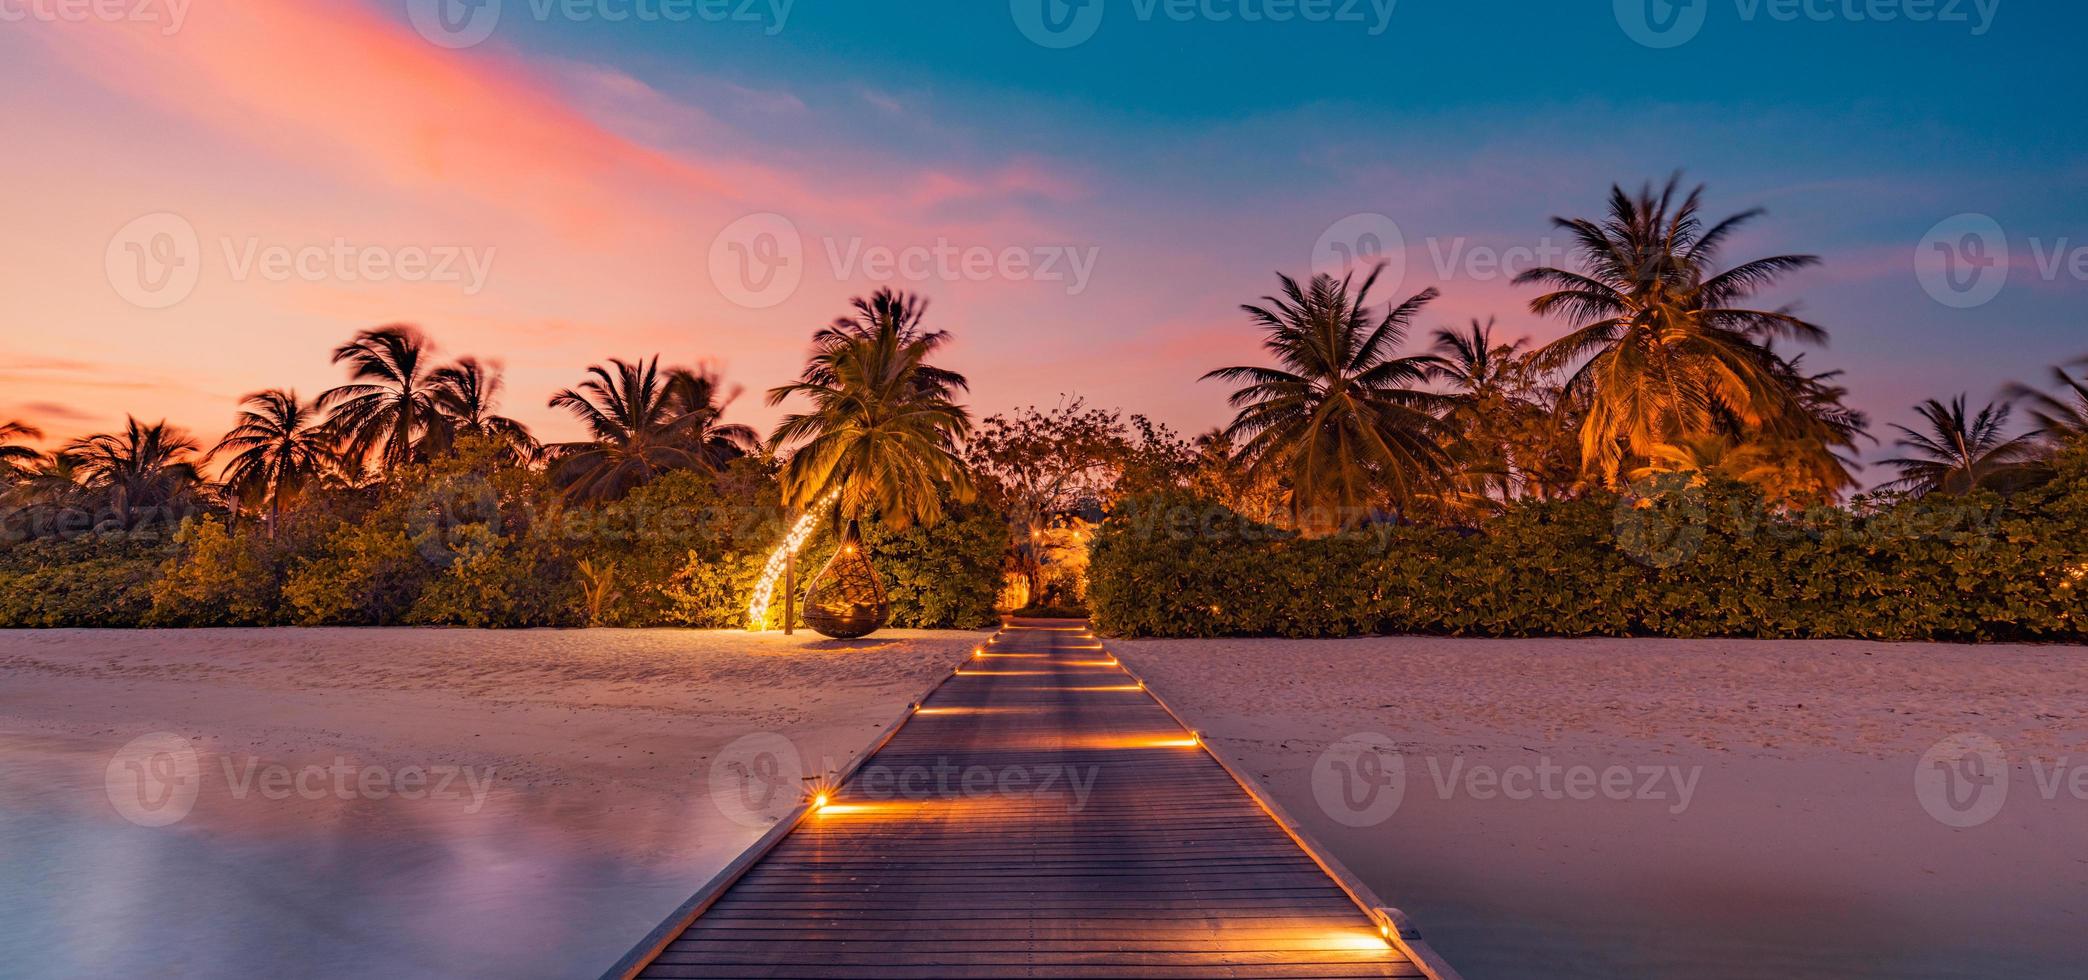 Amazing sunset panorama at Maldives. Luxury resort villas seascape with soft led lights under colorful sky. Beautiful twilight sky and colorful clouds. Beautiful beach background for vacation holiday photo